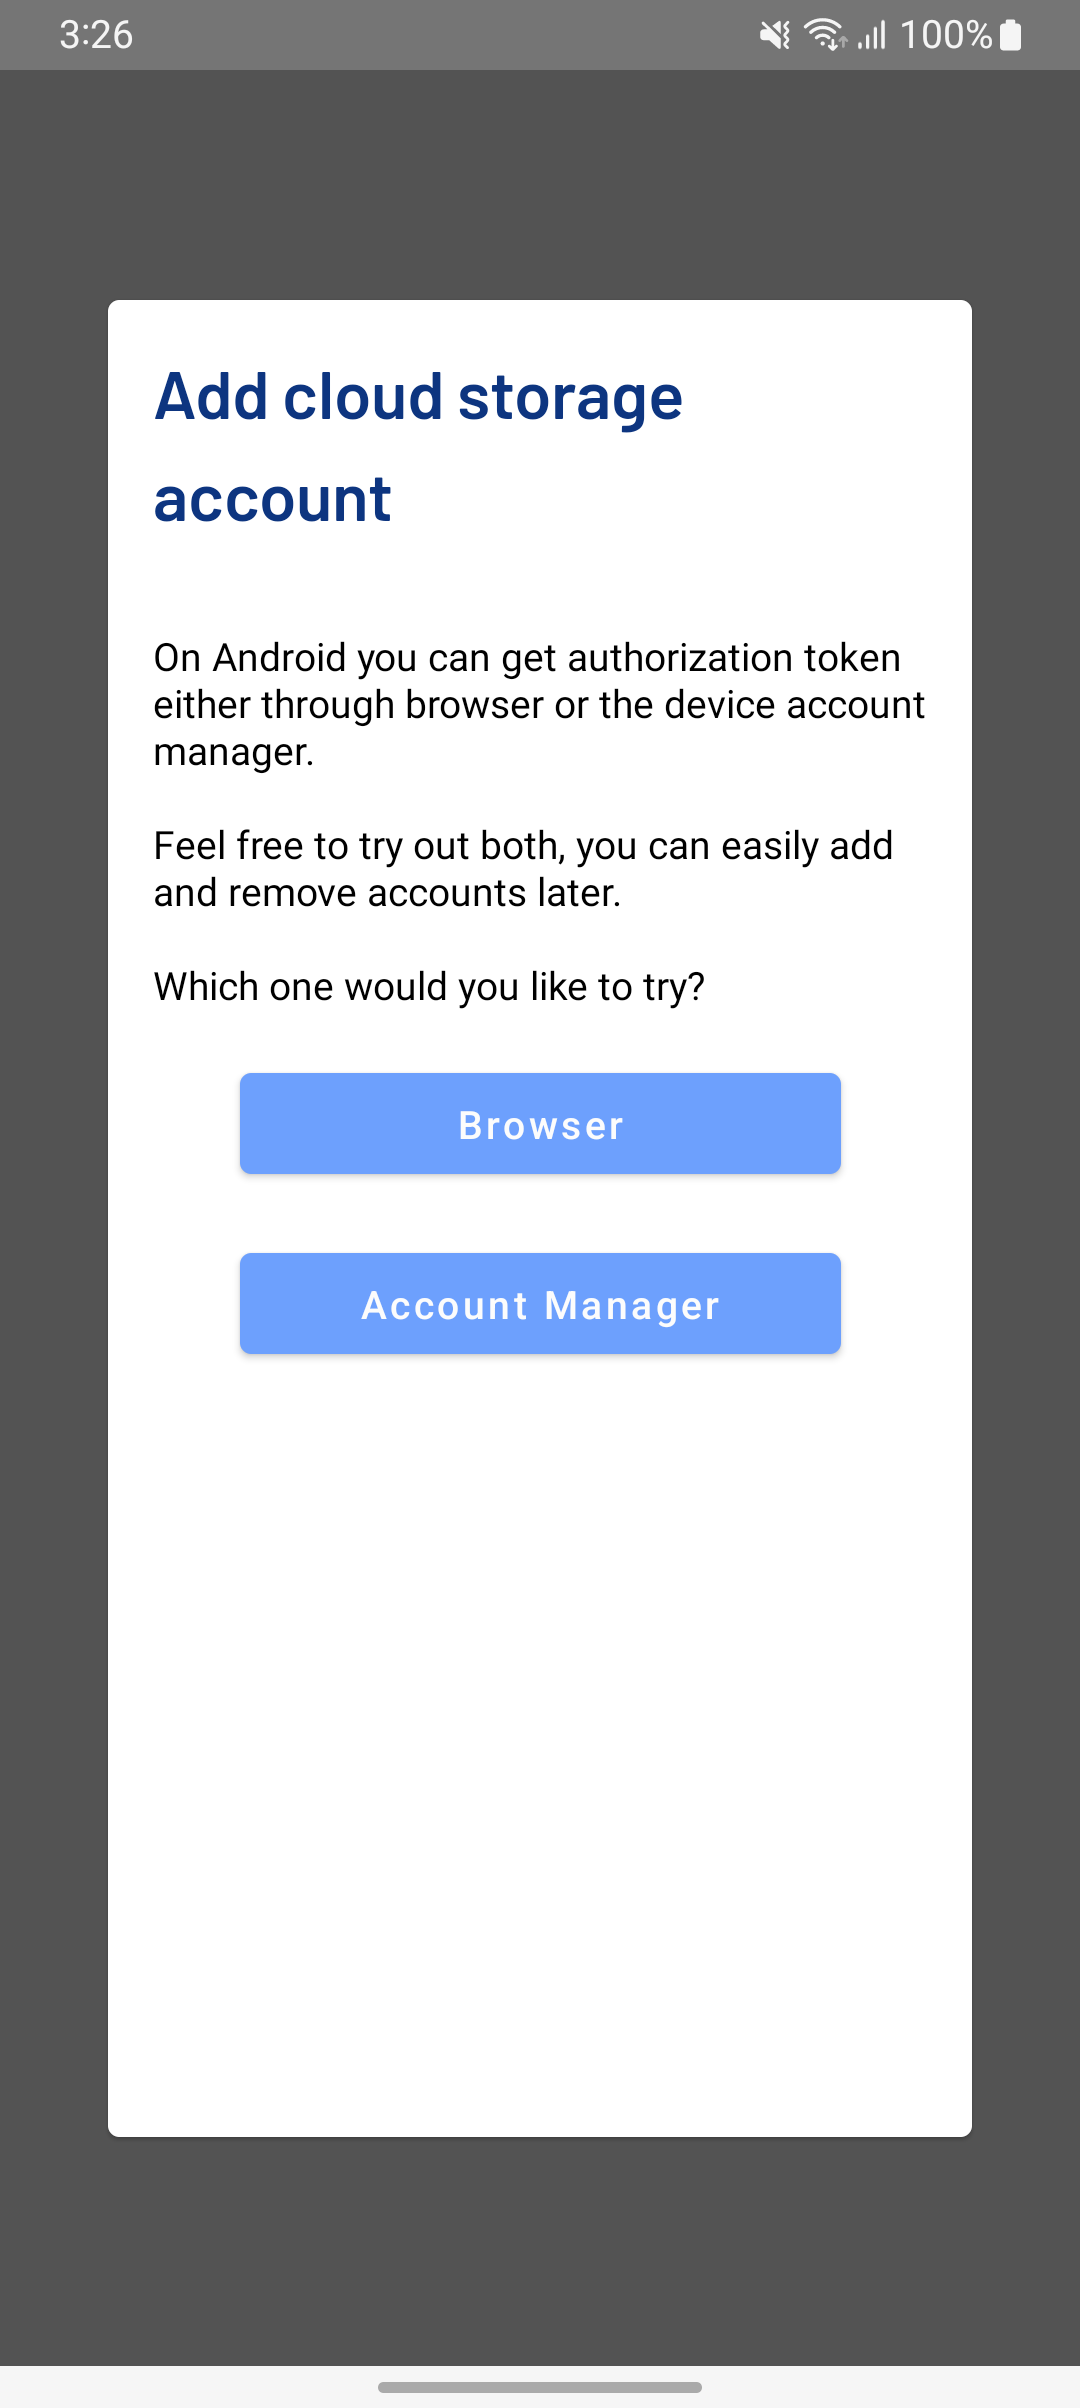 Screenshot of a dialog asking for preferred method of adding Google Drive account: browser or account manager